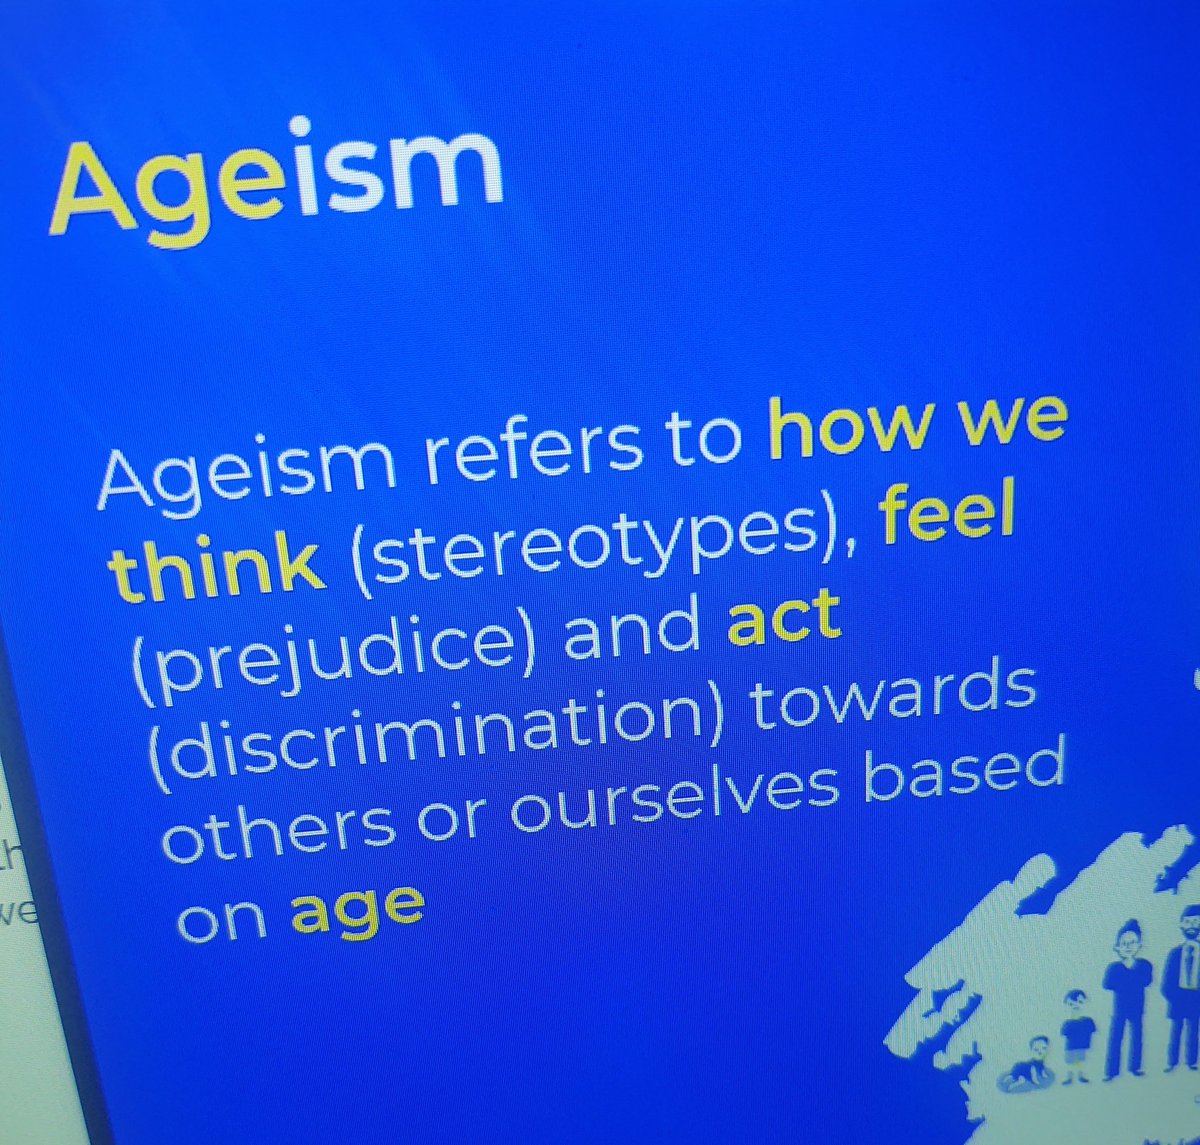 Ageism is also about young people! Today I am taking part in a panel discussion on ageism at the #FRF of the @EURightsAgency and proudly representing young people and the @Youth_Forum #aworld4allages